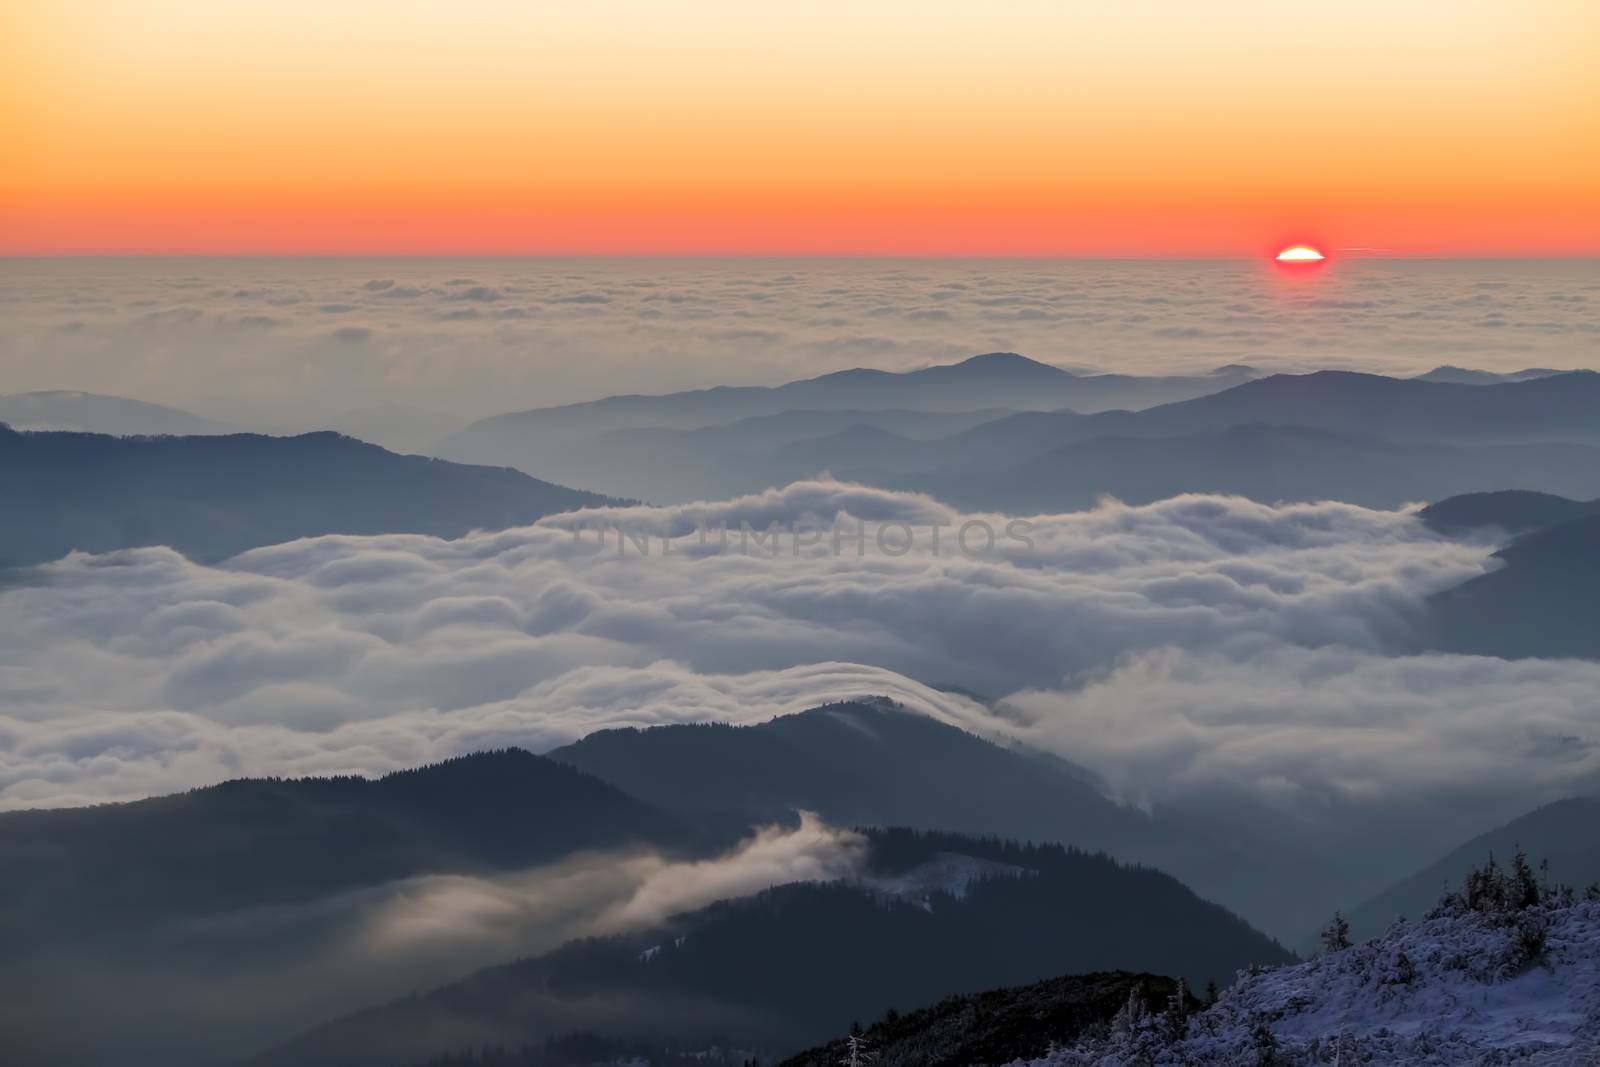 Low clouds on mountain valley and colorful sunrise viewed from mountain peak in winter, Romanian Carpathians.